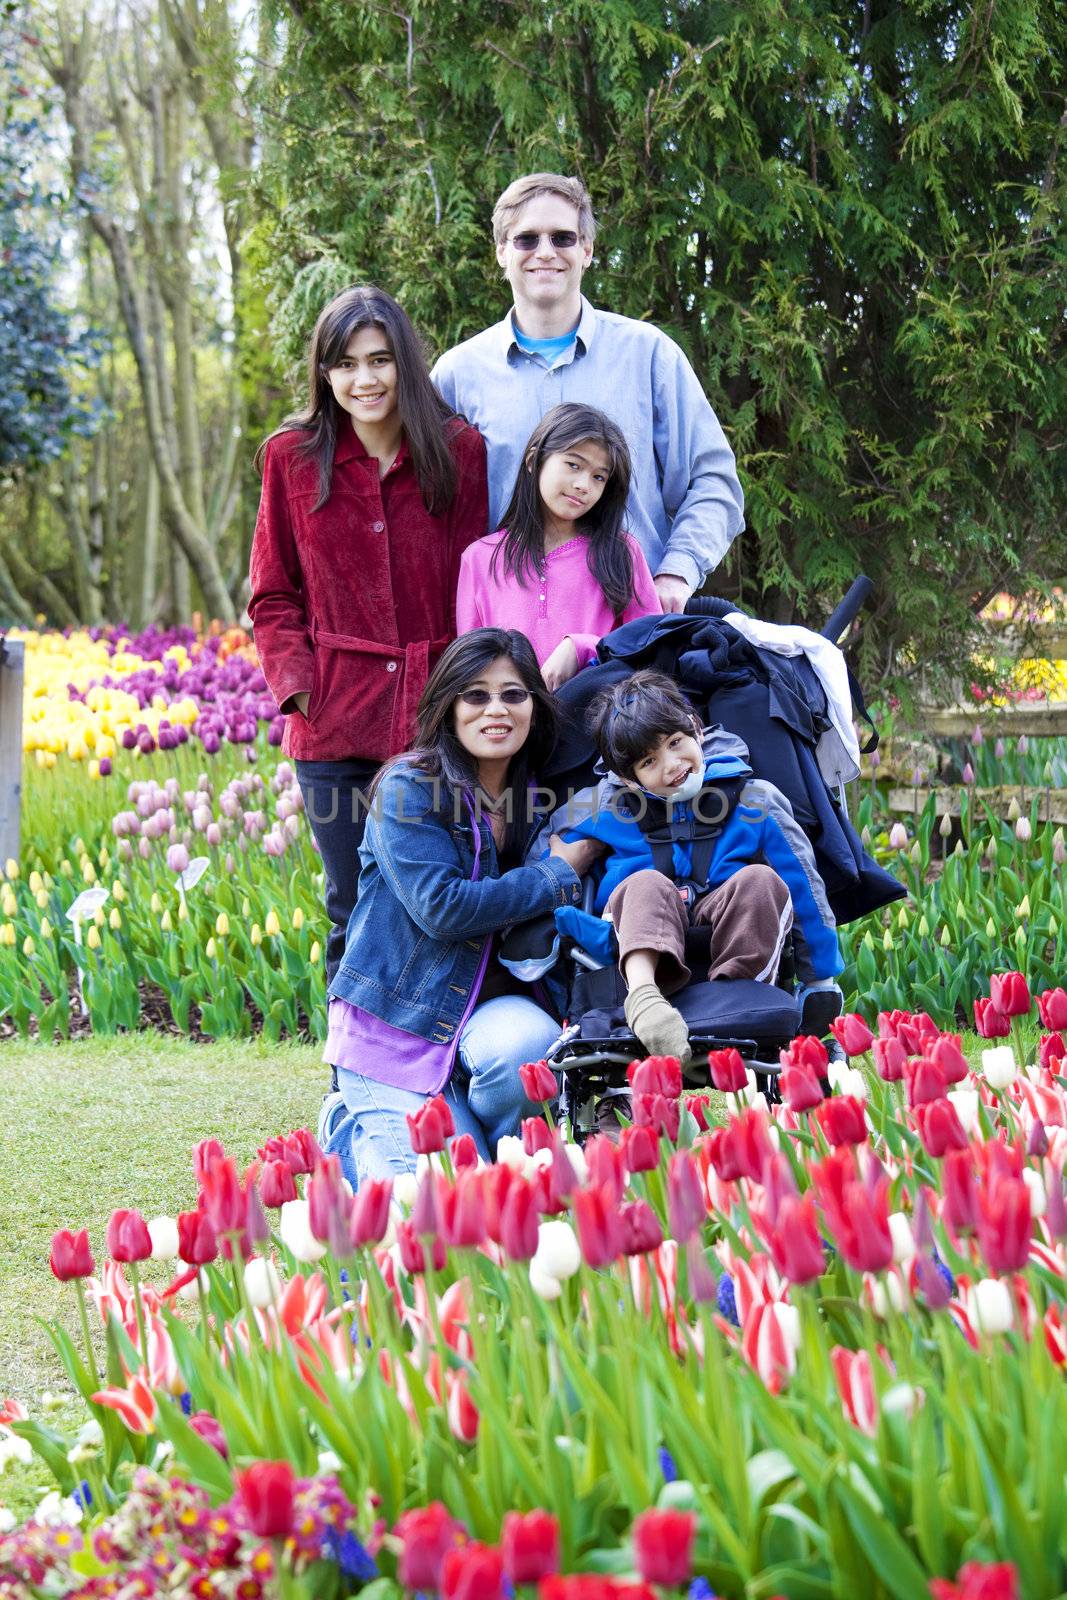 Interracial family in tulip gardens sitting near disabled boy in wheelchair. “Courtesy of RoozenGaarde (Tulips.com).”